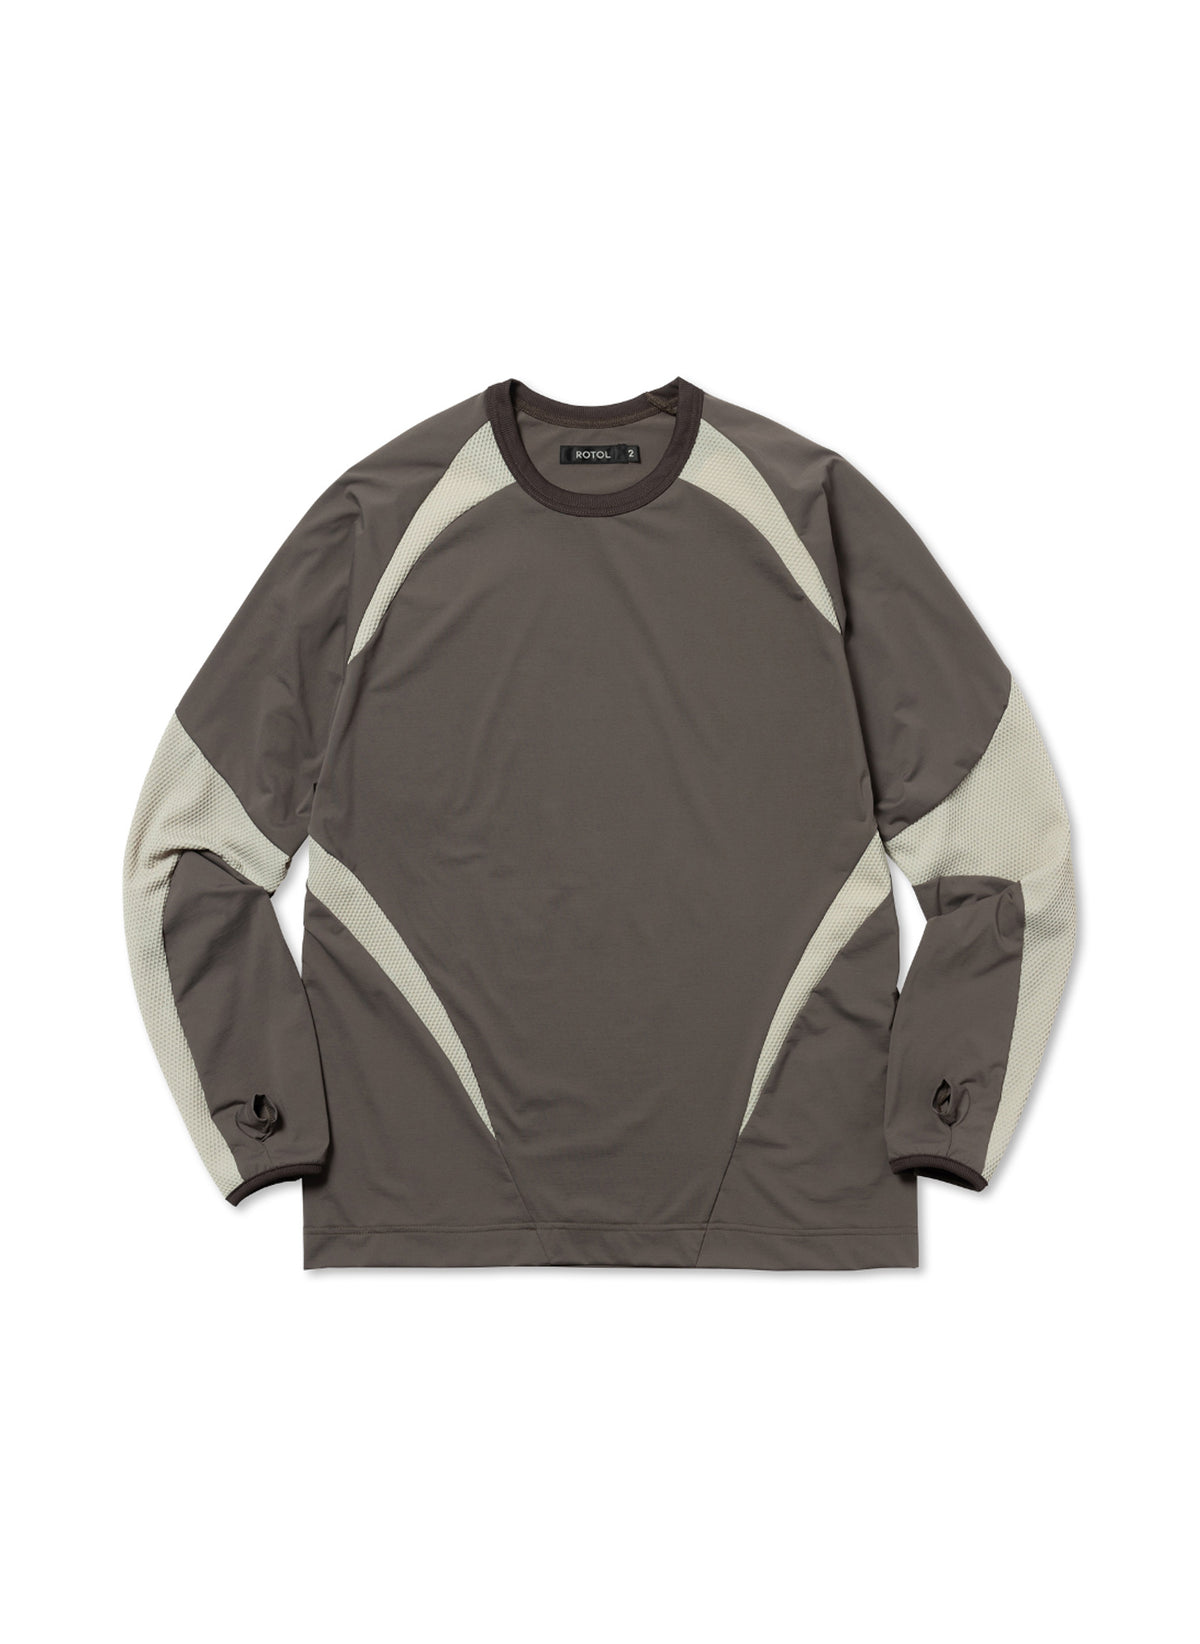 <span style="color: #f50b0b;">Last One</span> ROTOL / LONG SLEEVE T X BROWN